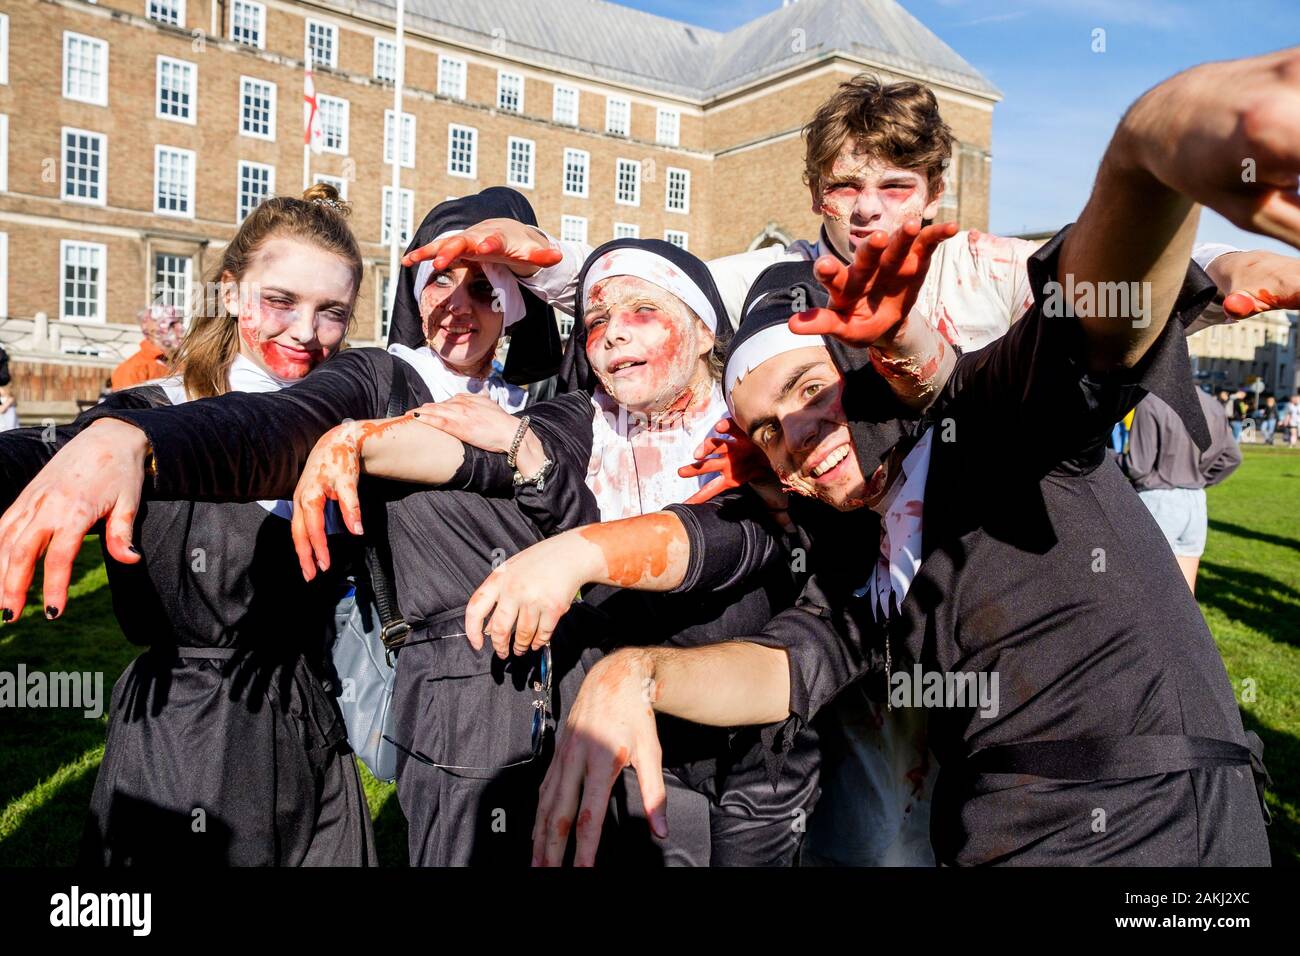 Bristol, UK. 28th Oct, 2017. People dressed as a zombies are pictured as they participate in a zombie walk through the city centre. Stock Photo